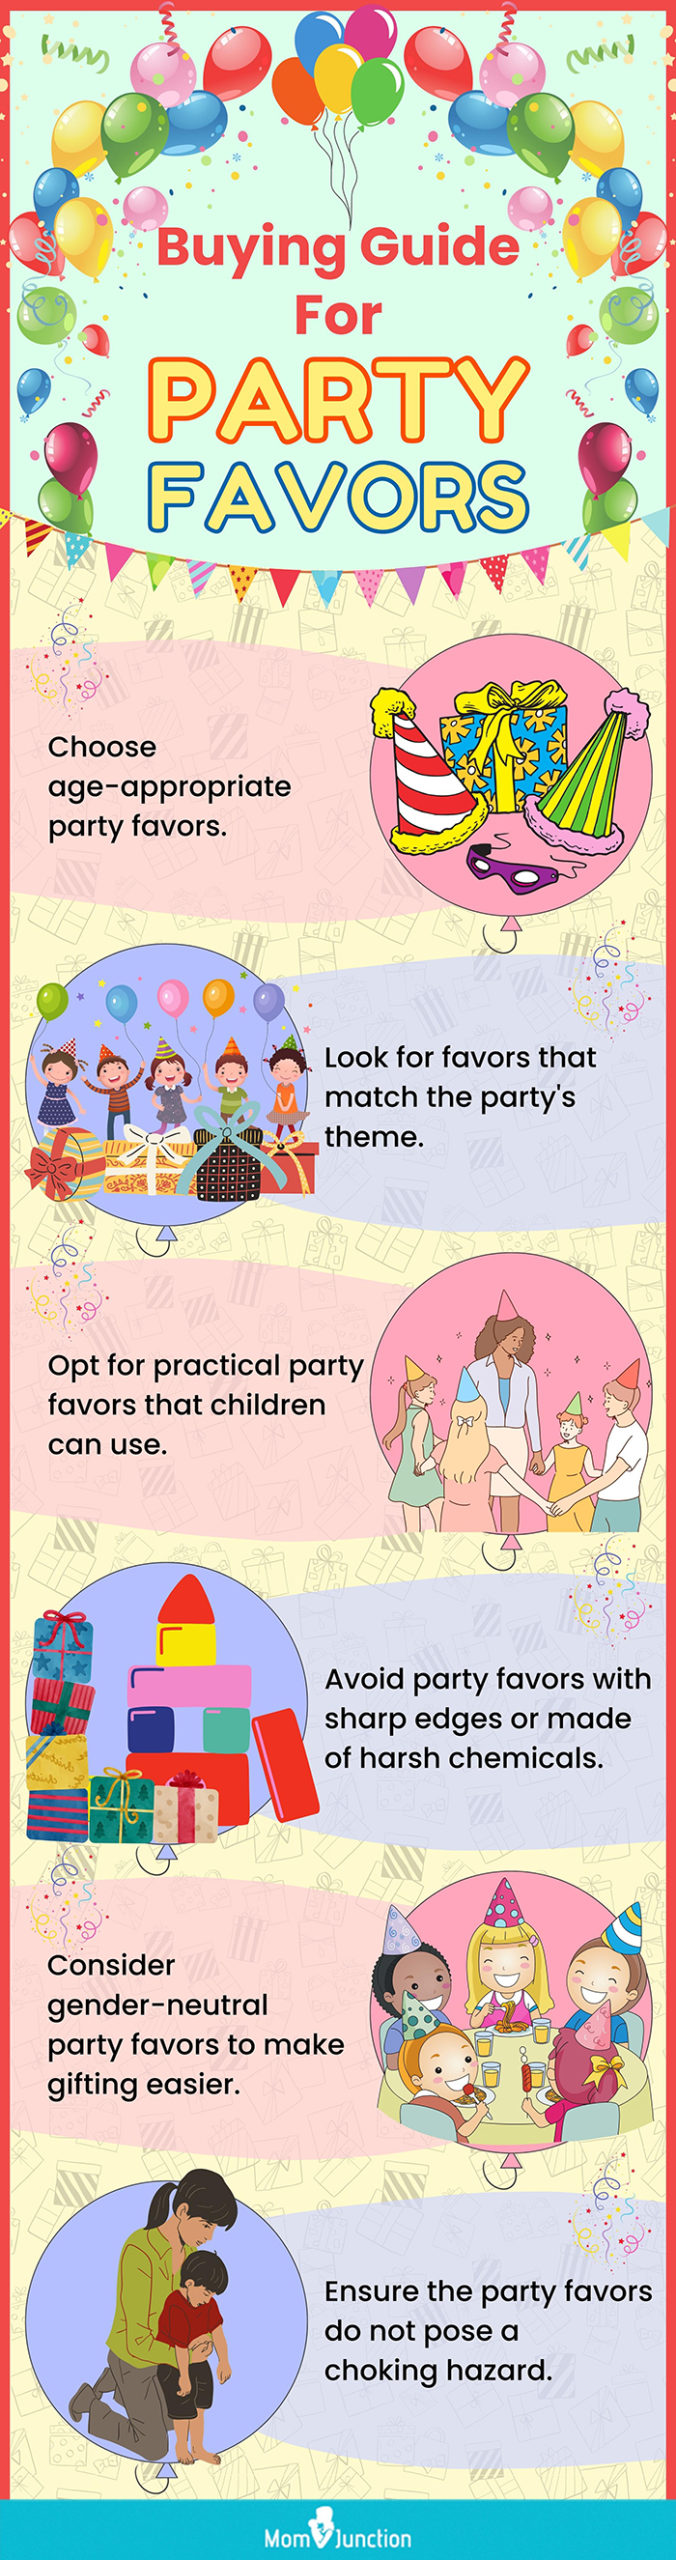 https://www.momjunction.com/wp-content/uploads/2023/02/Buying-Guide-For-Party-Favors-scaled.jpg